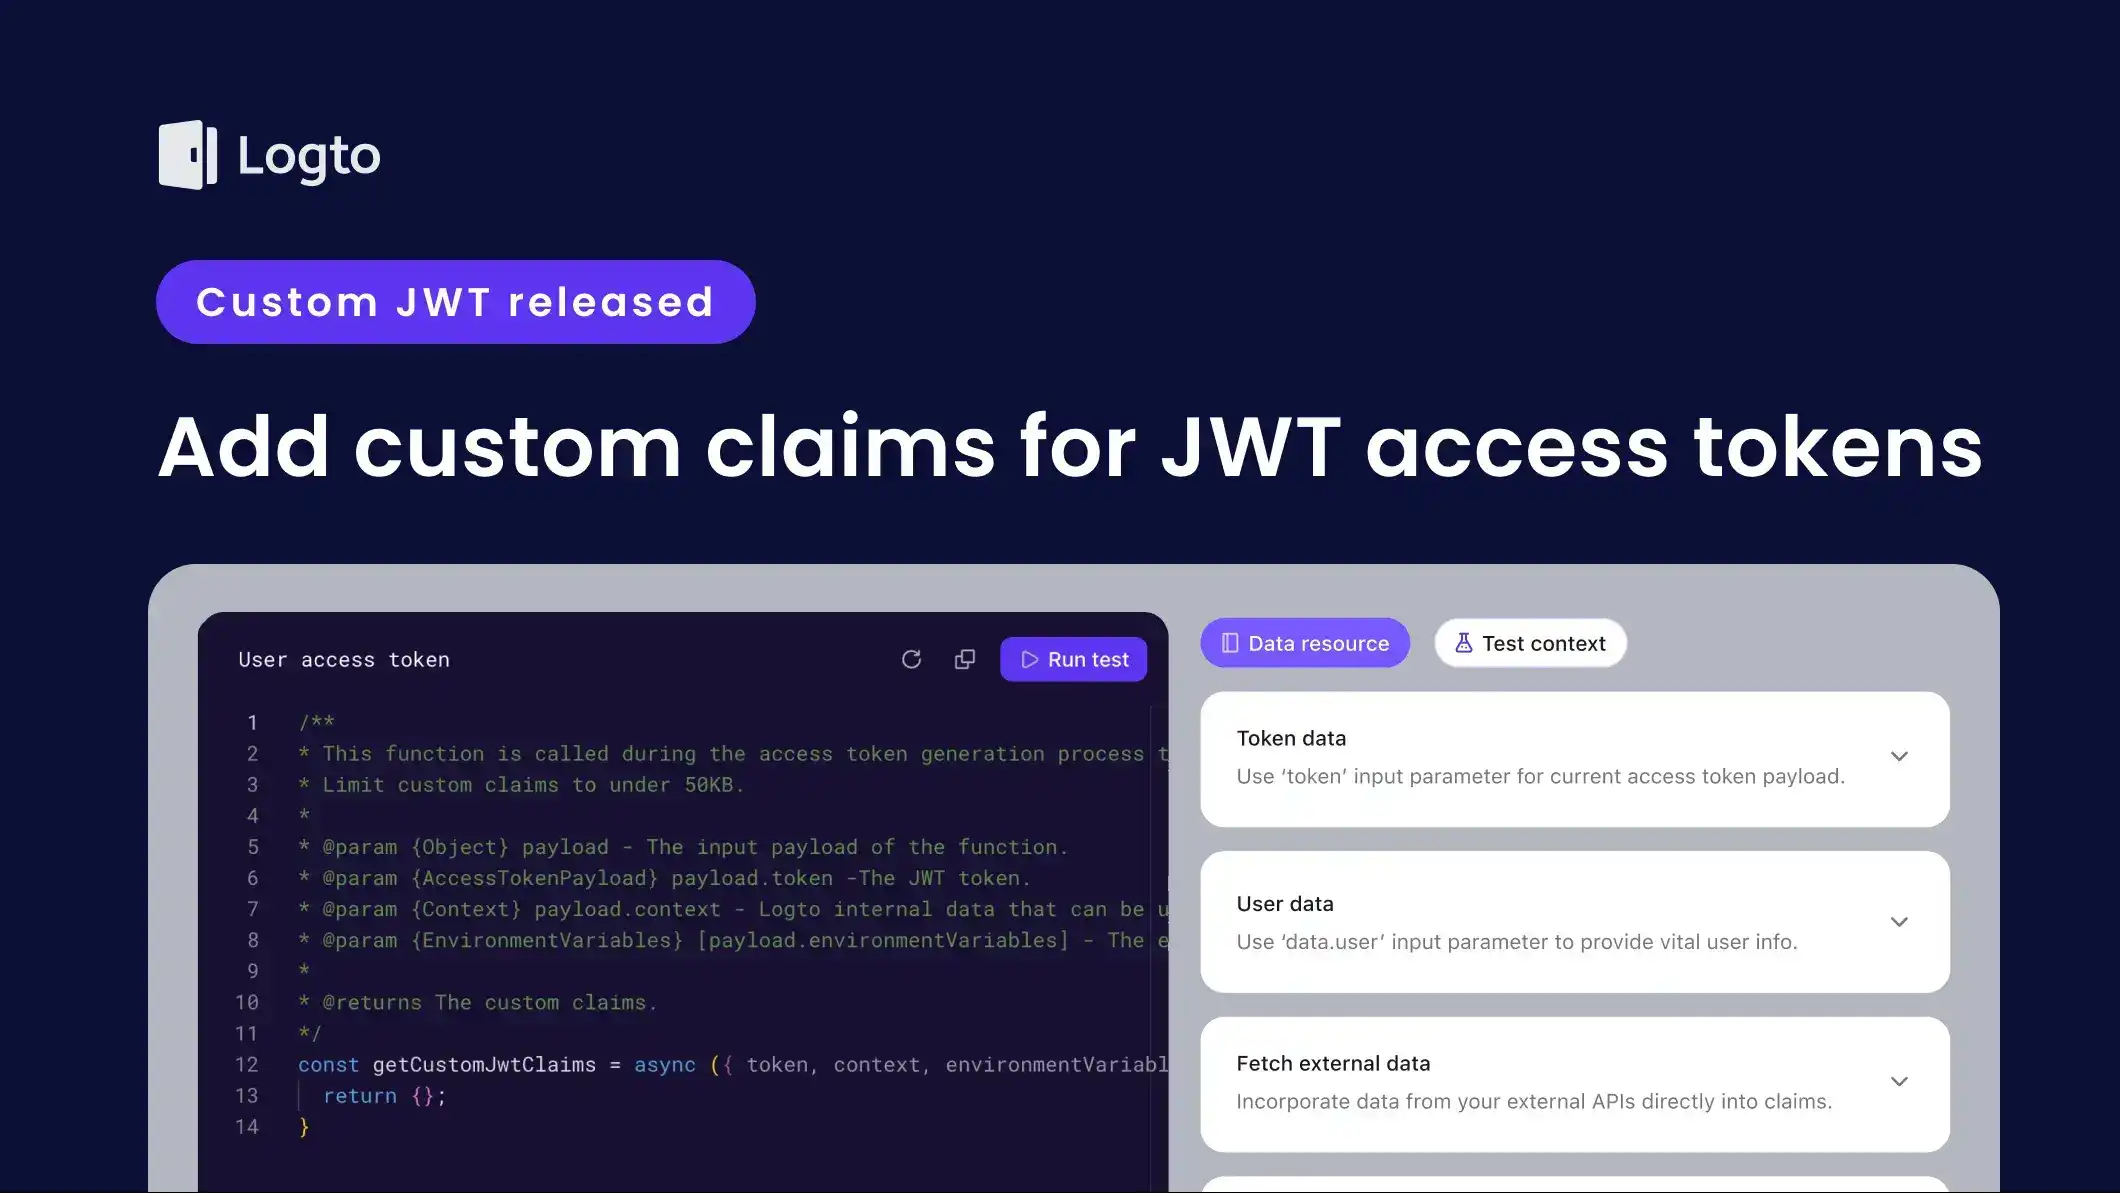 Add custom claims for JWT access tokens with Logto to boost your authorization